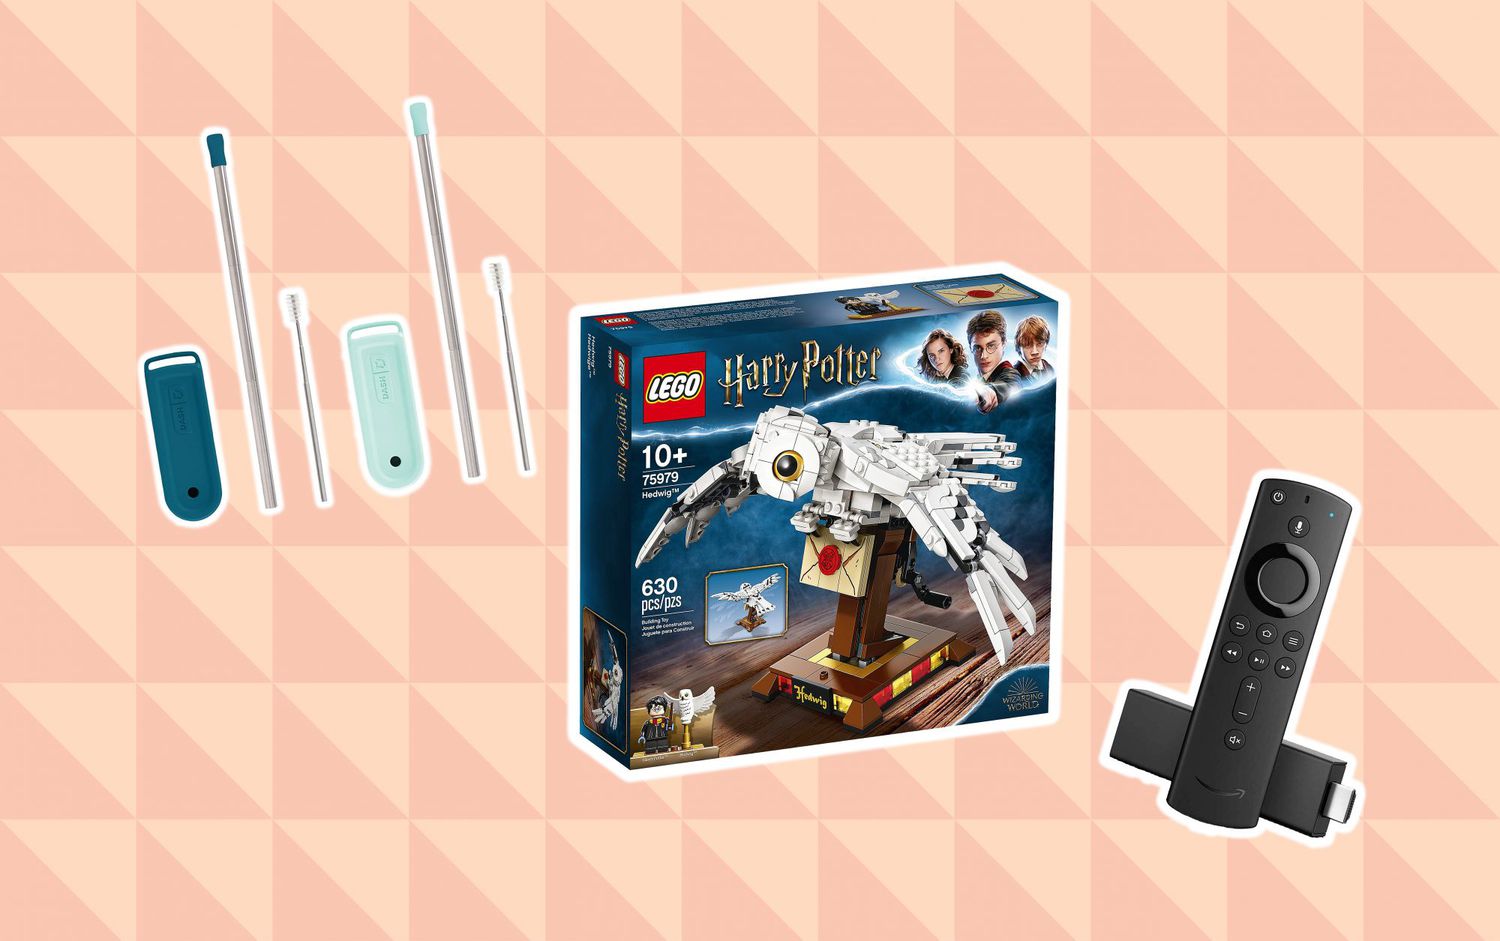 reusable metal straws, harry potter owl lego set, amazon fire tv stick on a colored background